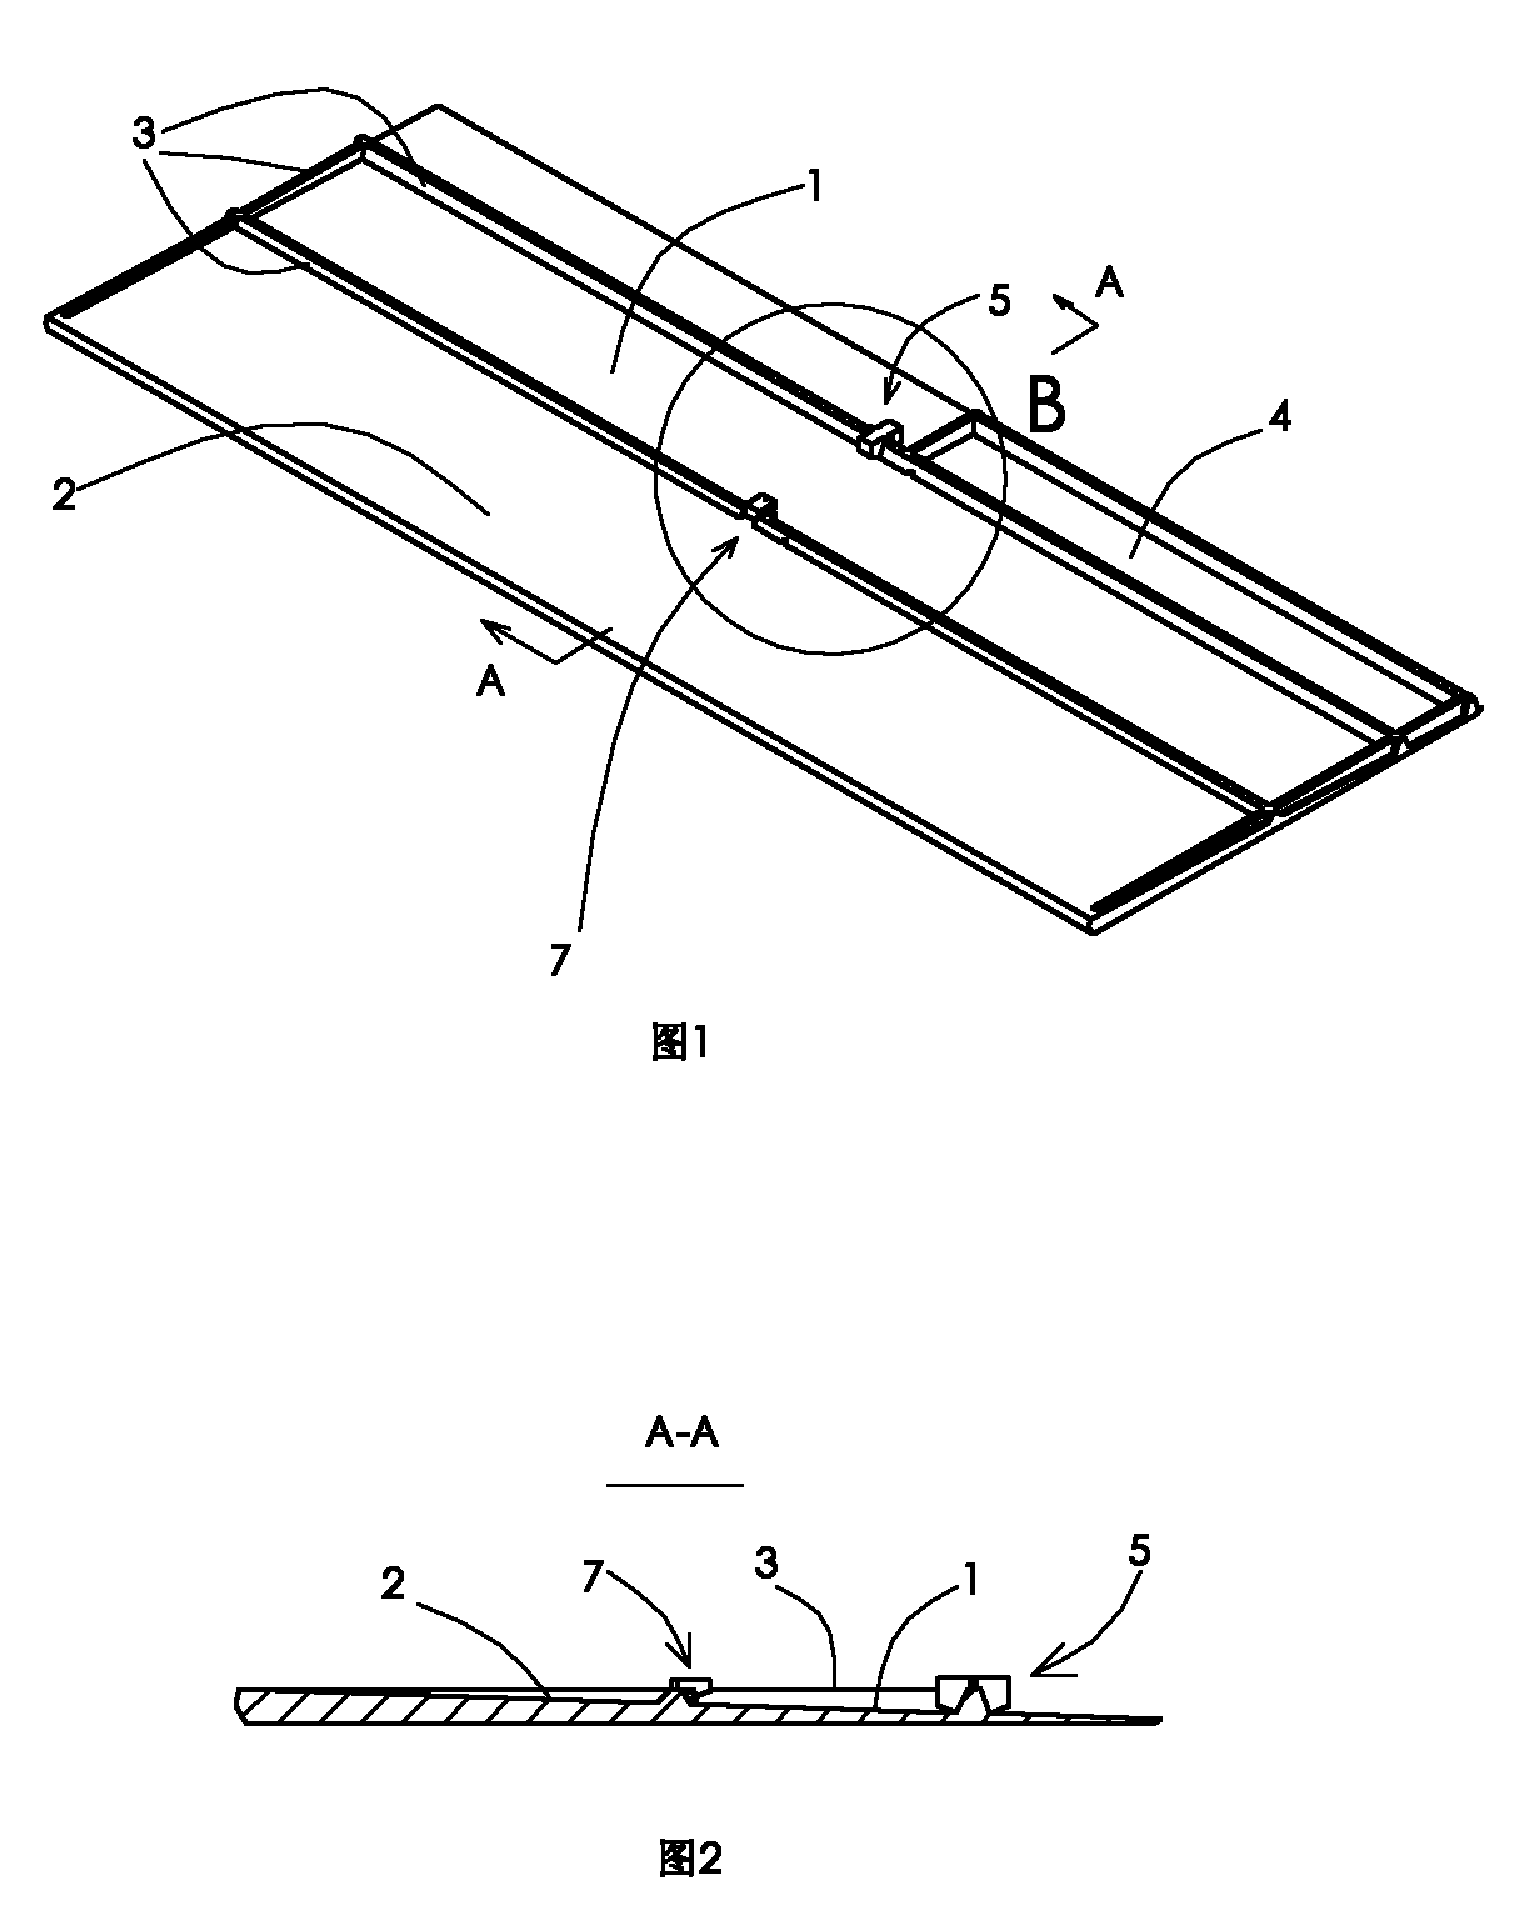 Method for making ice and salt and desalinating sea water with natural resources